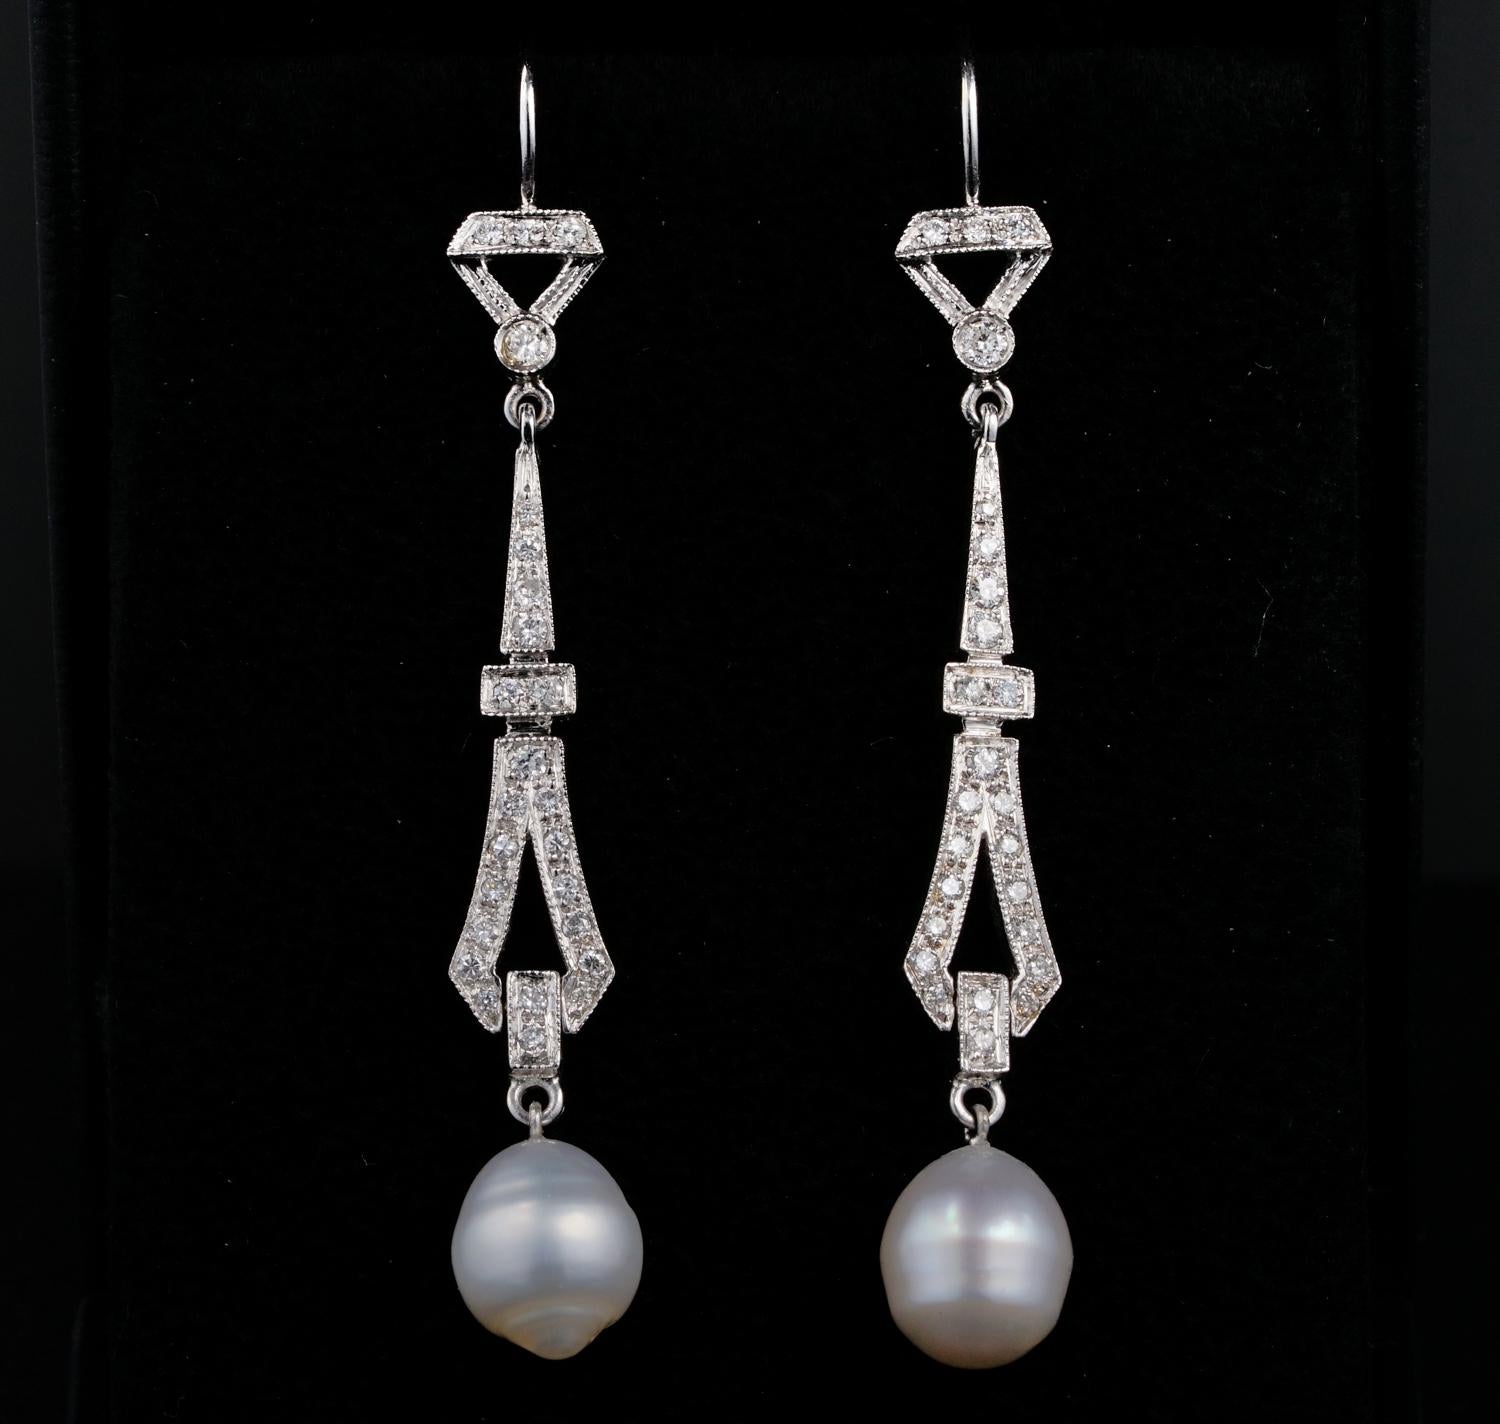 These gorgeous late Art Deco period long drop earrings are 1935
Elegant and timeless design expressed in top bow leading to a tasteful long geometric line, all set with transitional round cut Diamonds, ending with white cultured Baroque shaped salt